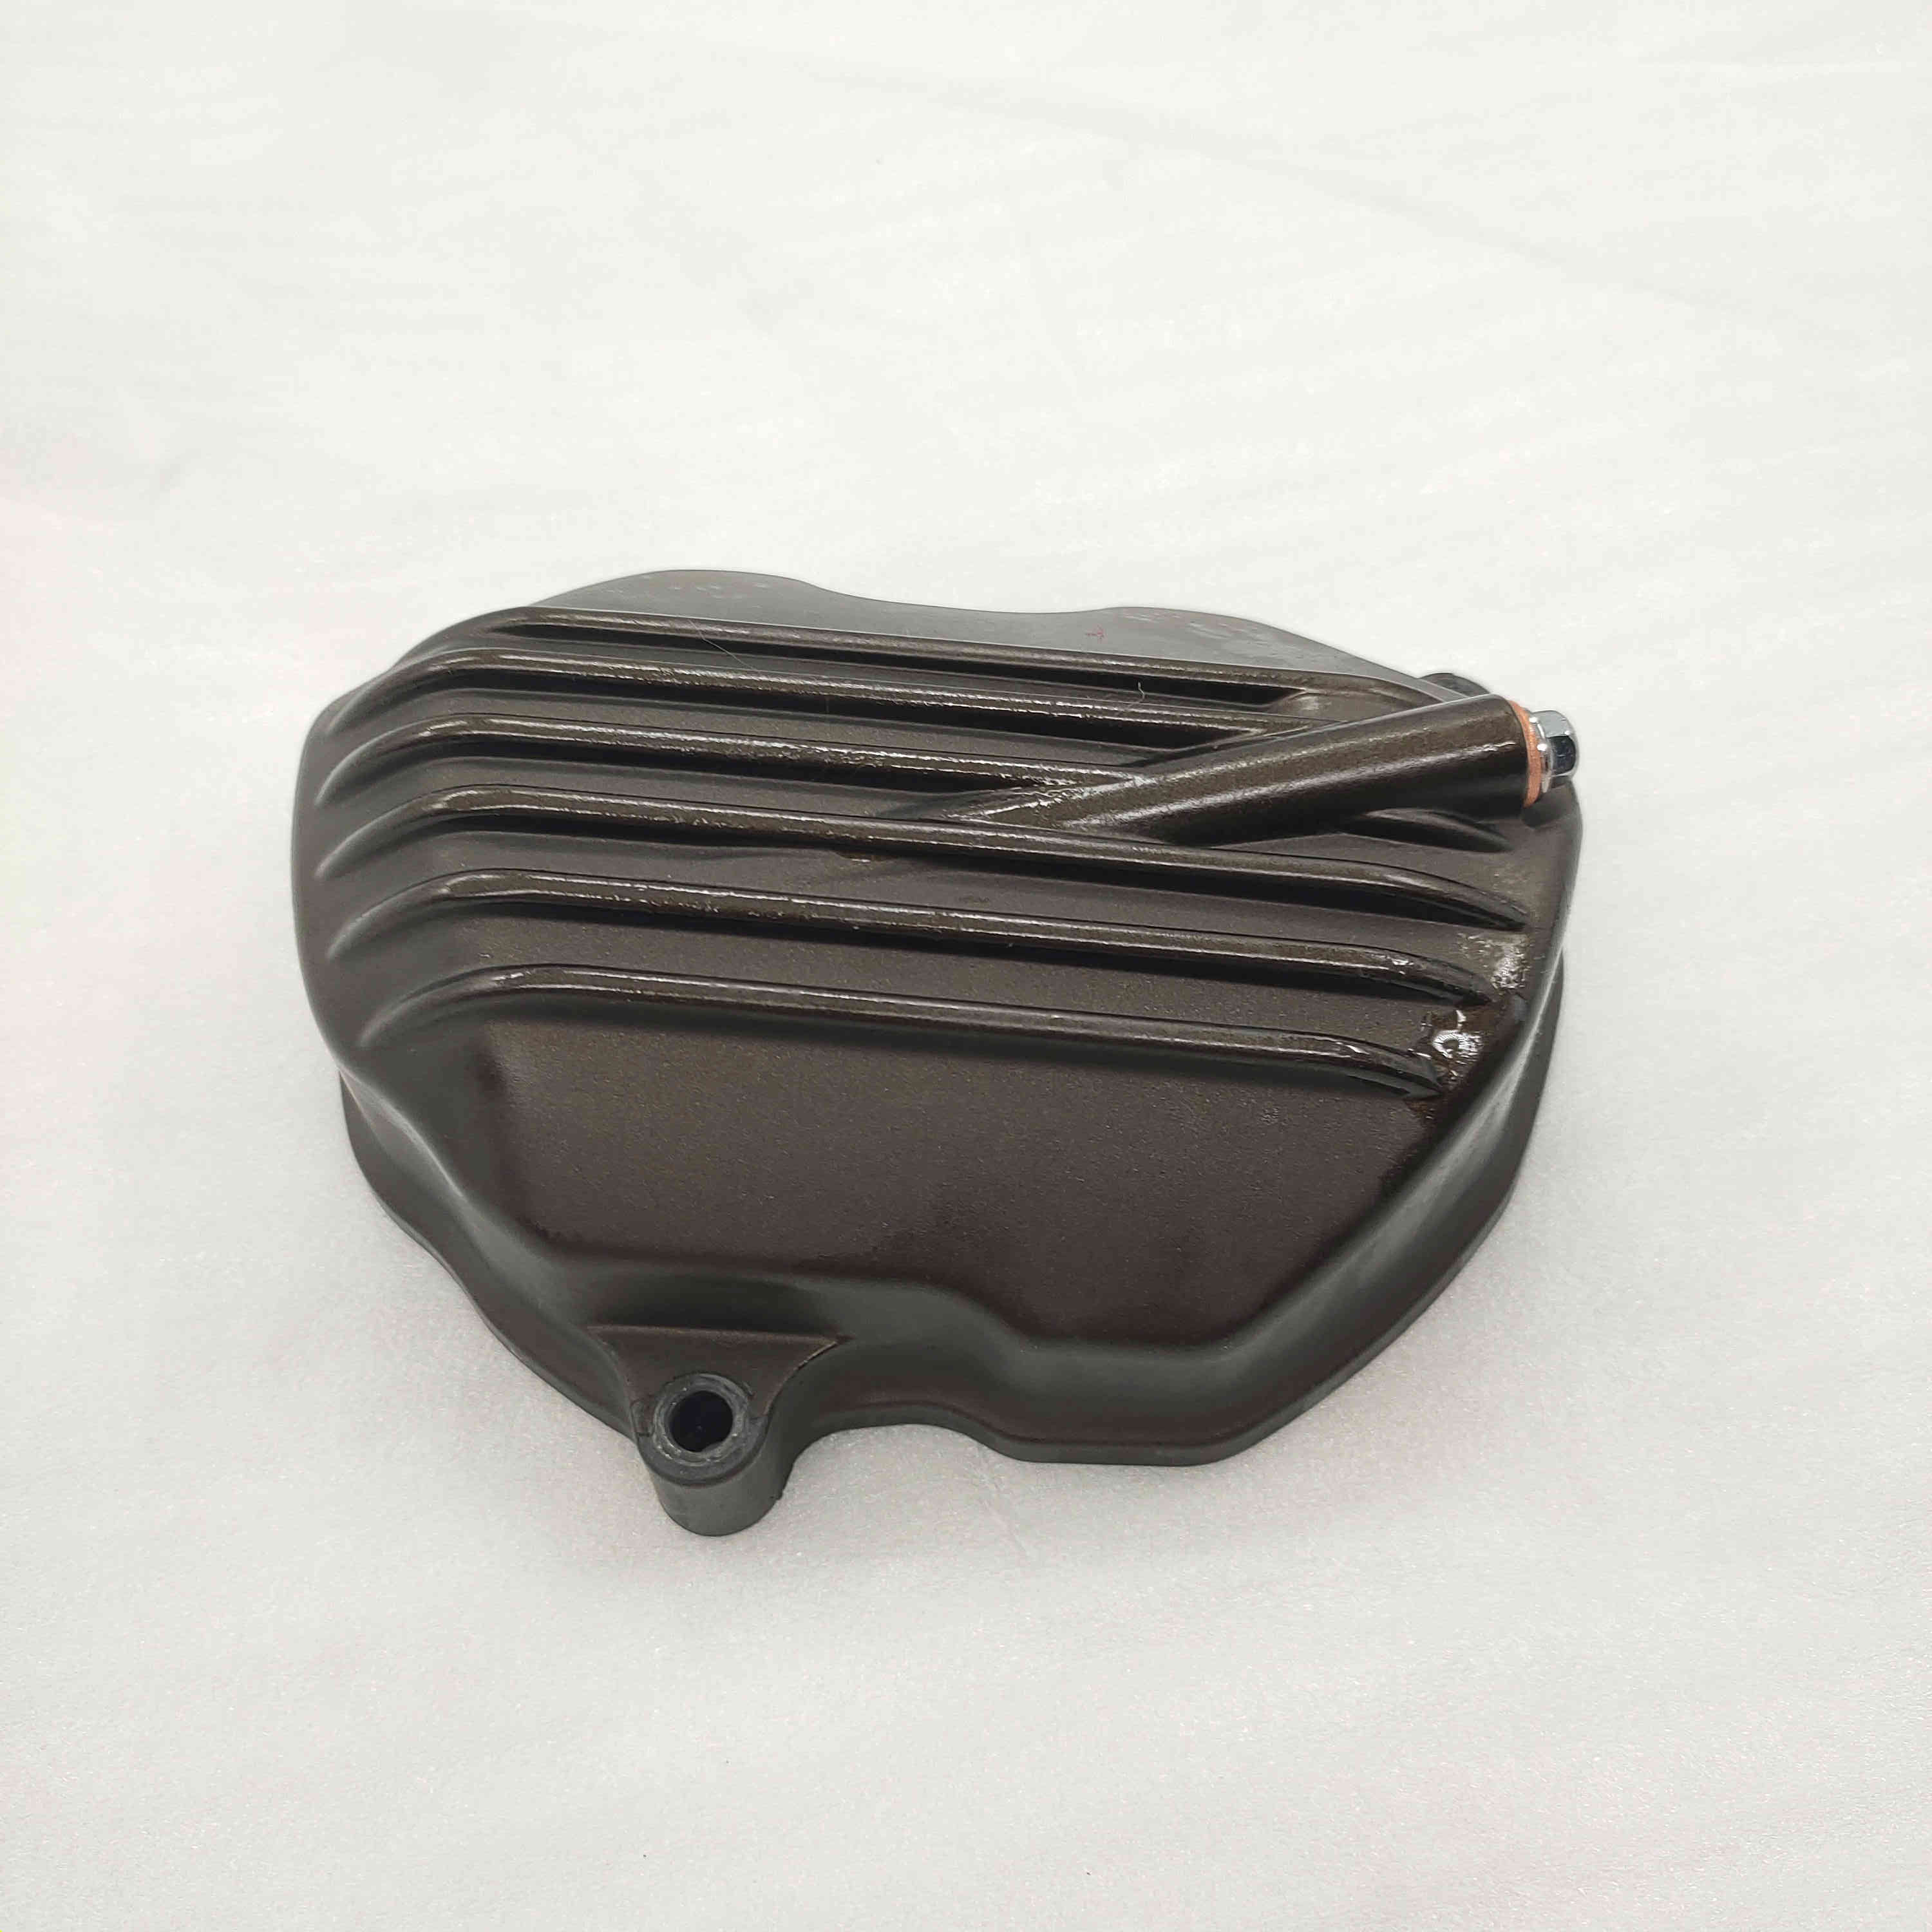 China manufacturer sale High quality Wholesale Cylinder Head Cover auto engine parts Retail motorcycle accessories